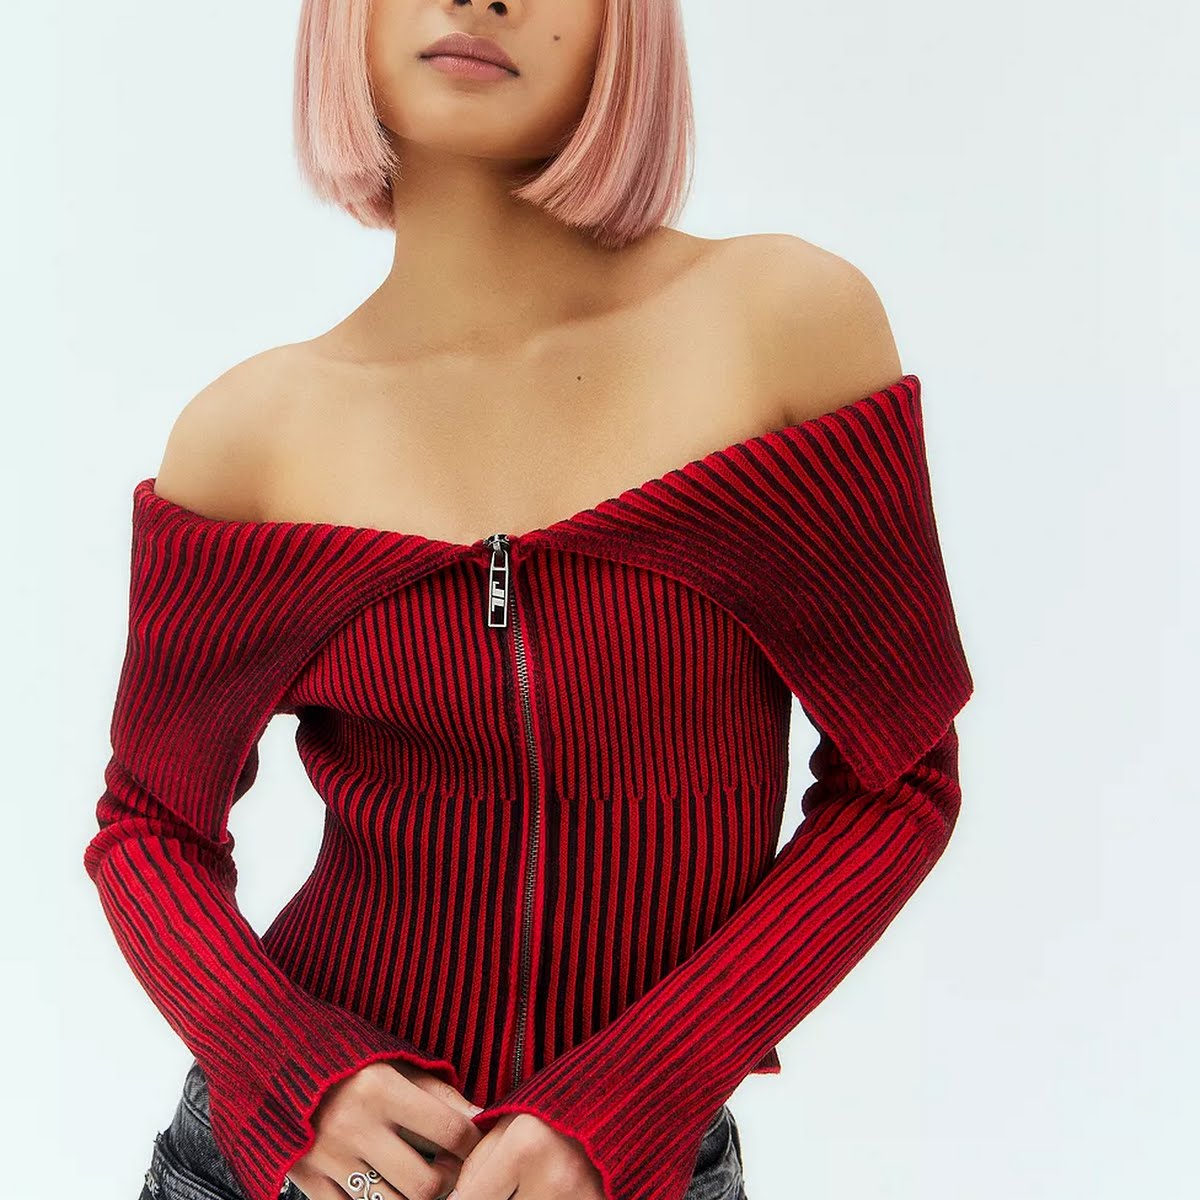 Urban Outfitters Red Tribeca Knit Top, €75